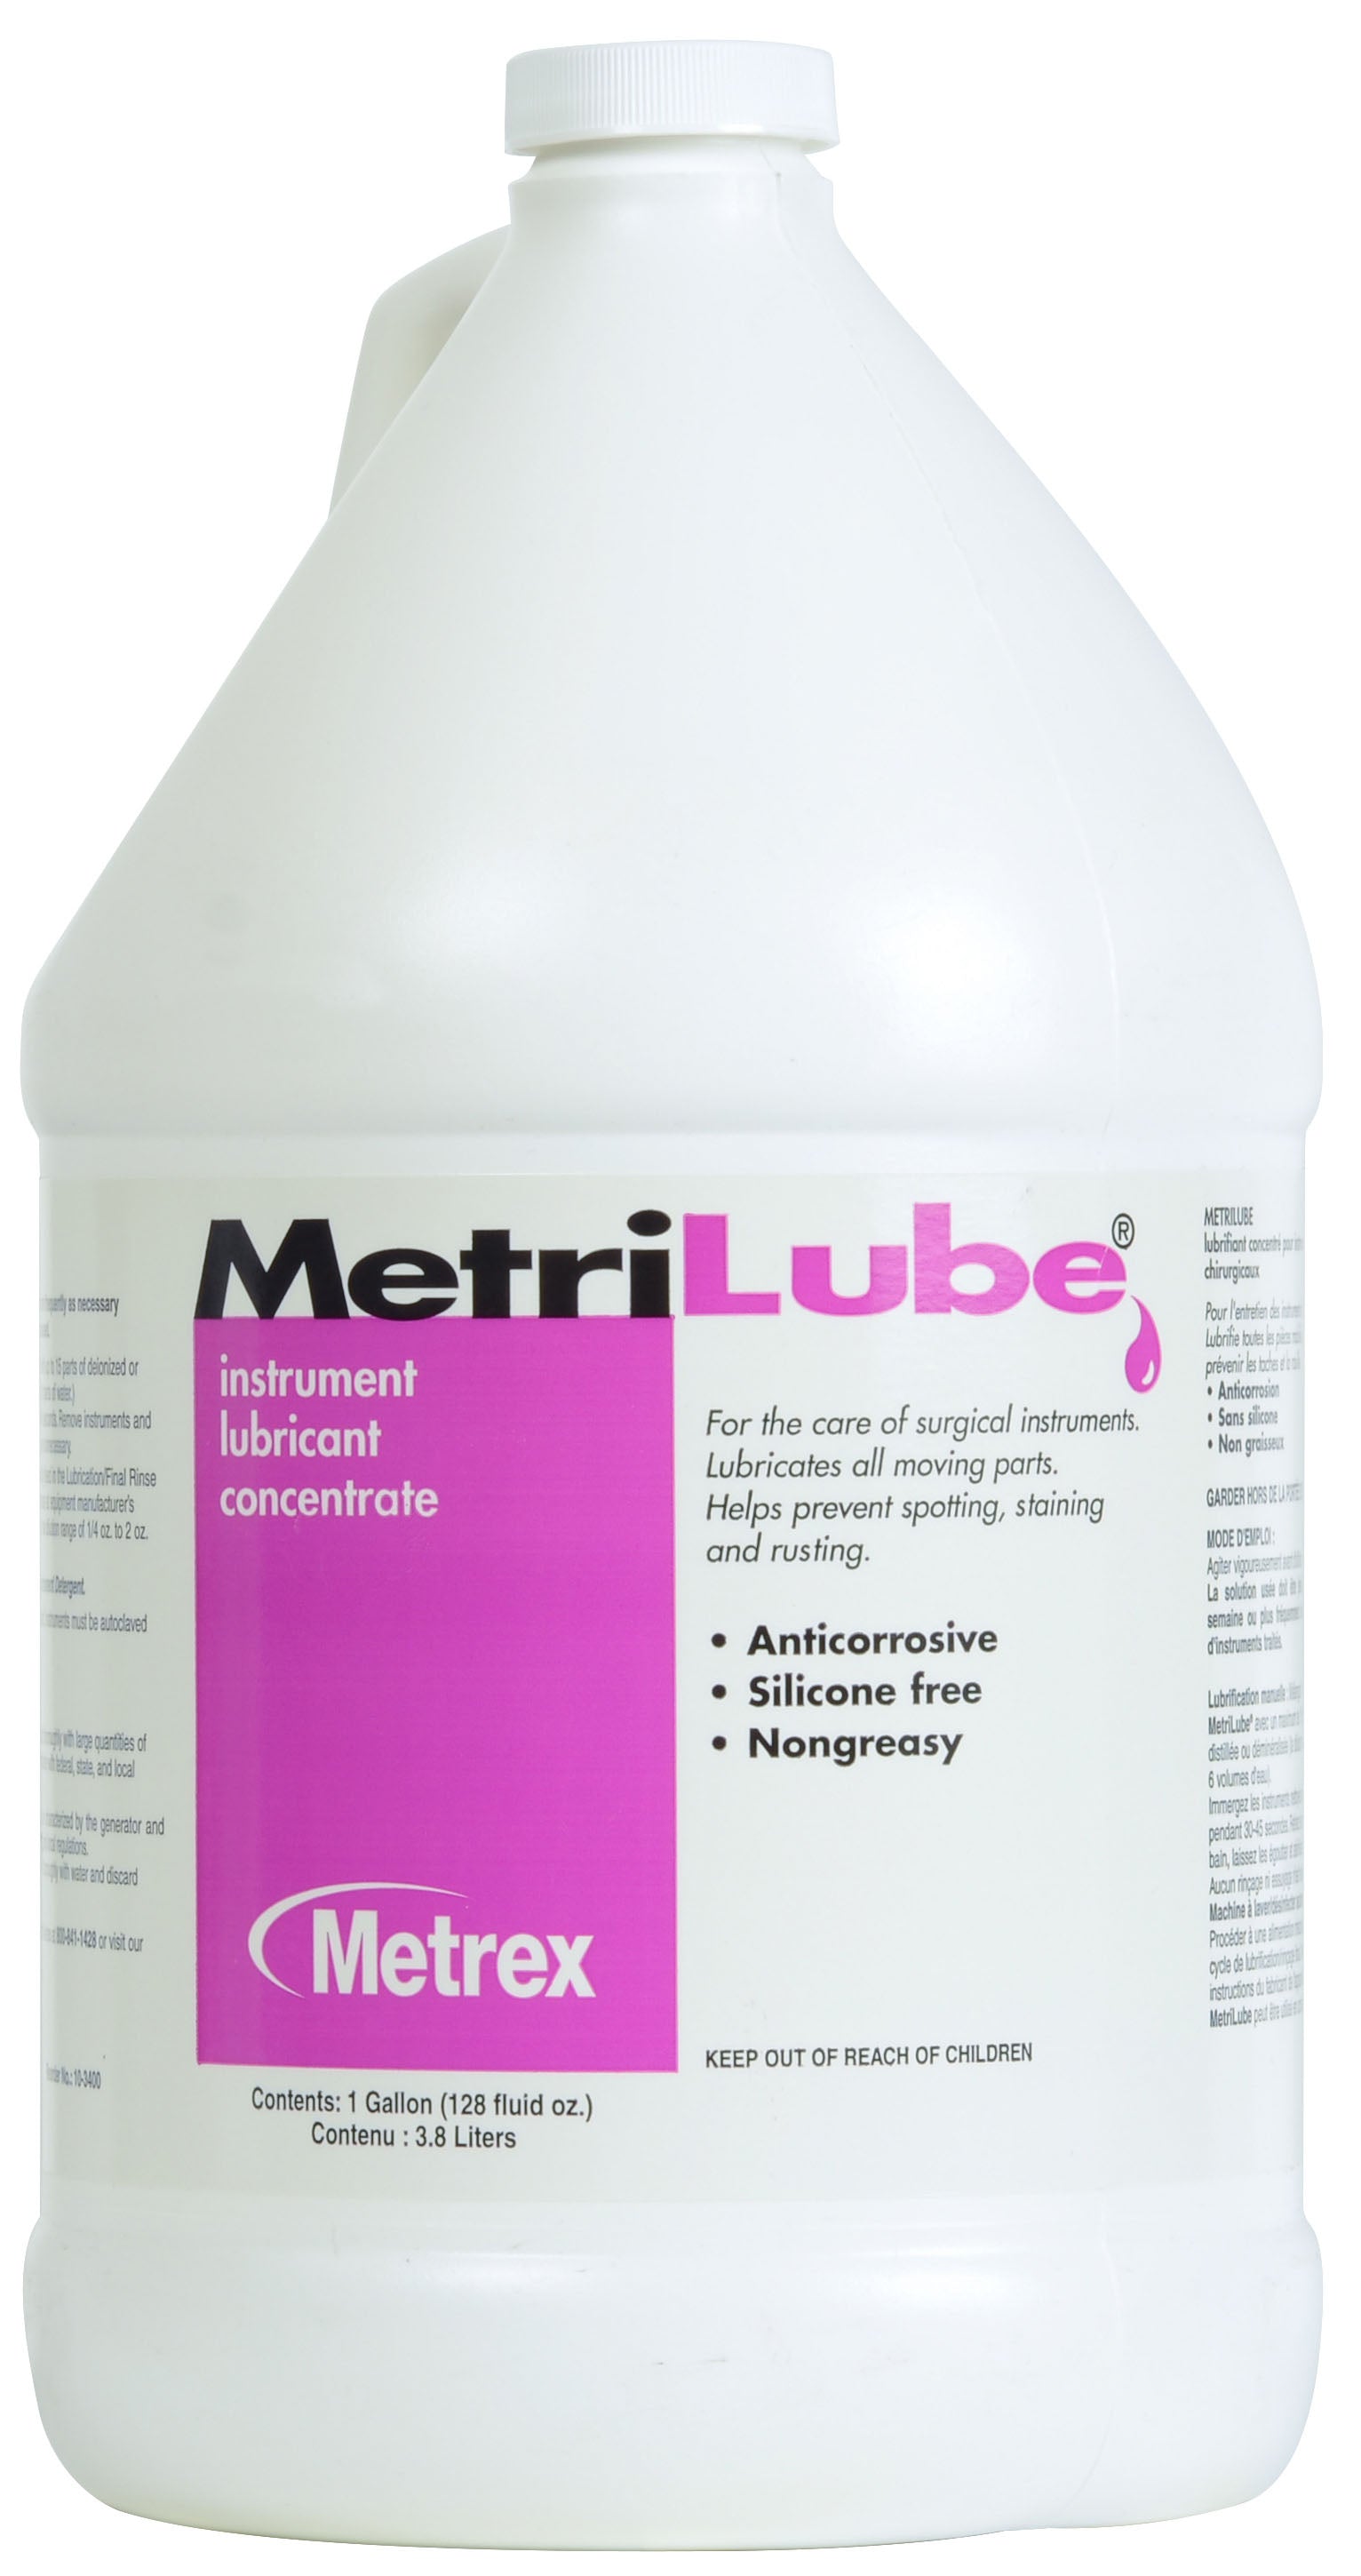 Metrilube Instrument Lubricant Concentrate